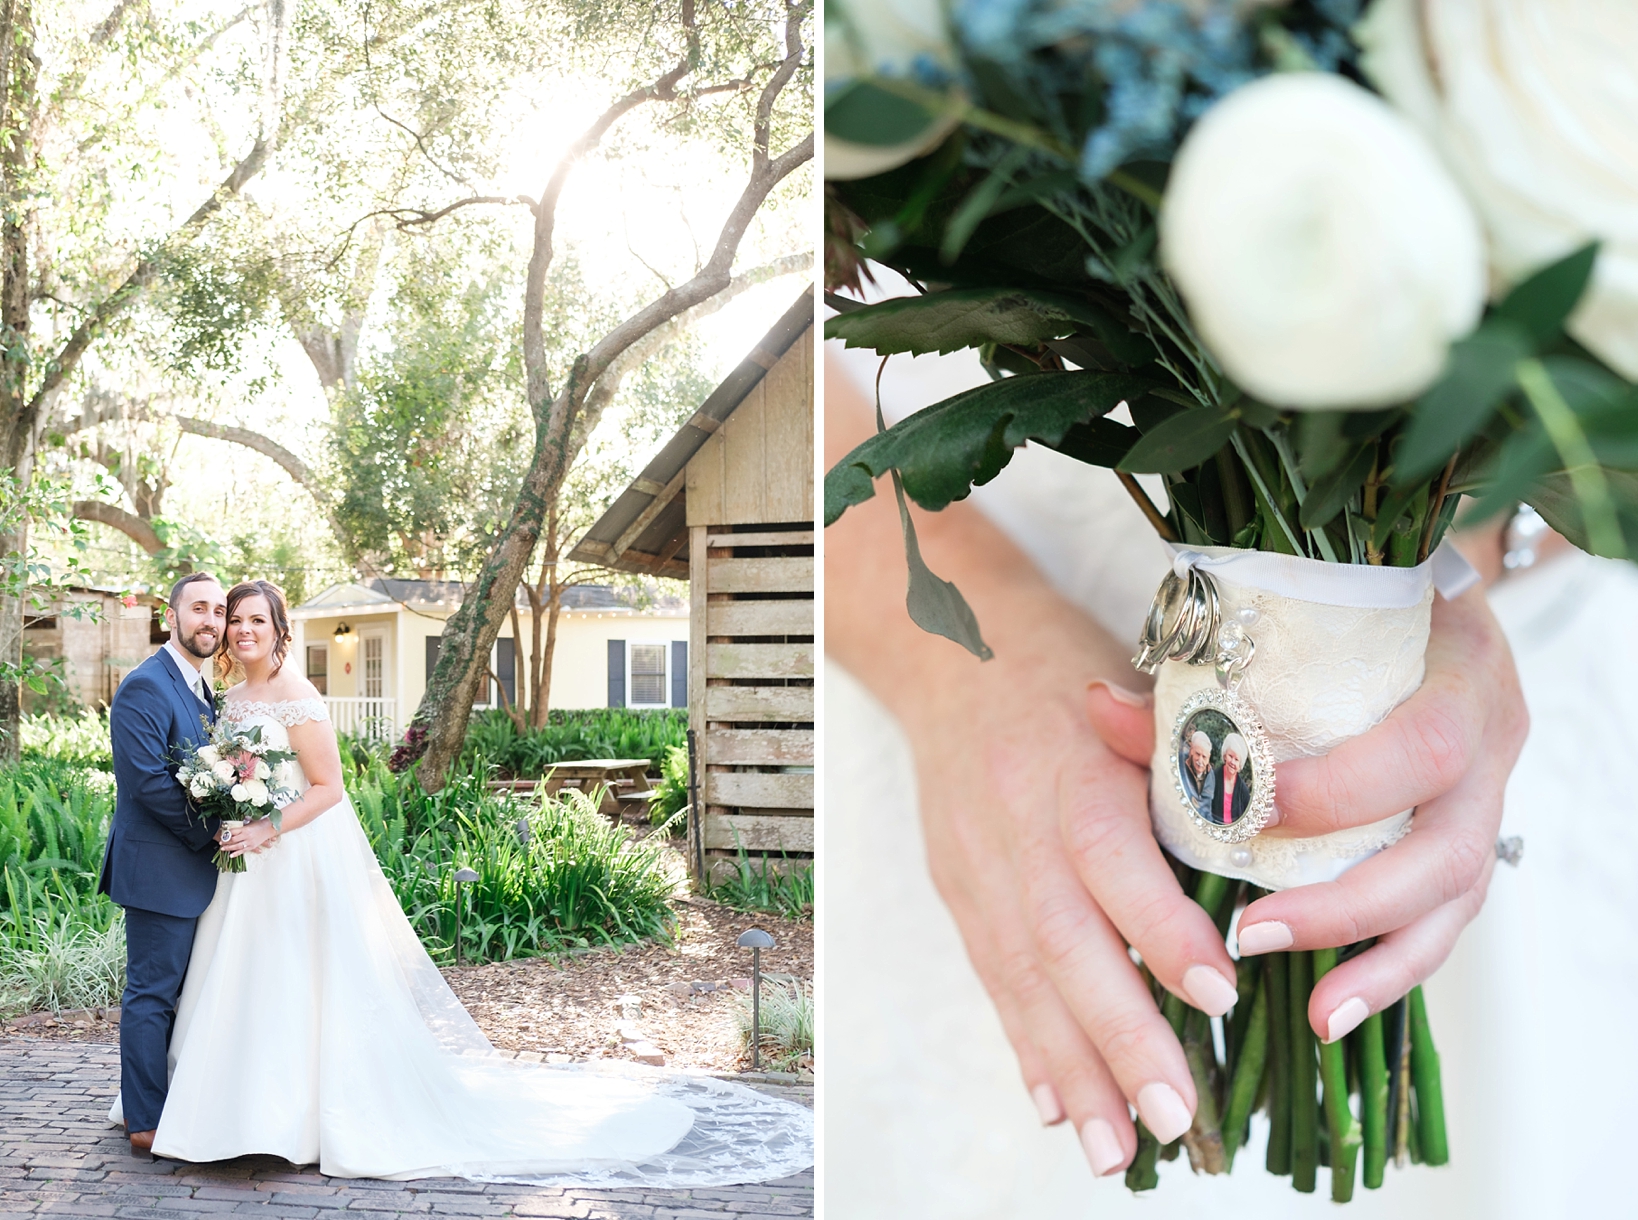 The Bride and Groom pose for a formal photo and a close up of the Brides bouquet with locket